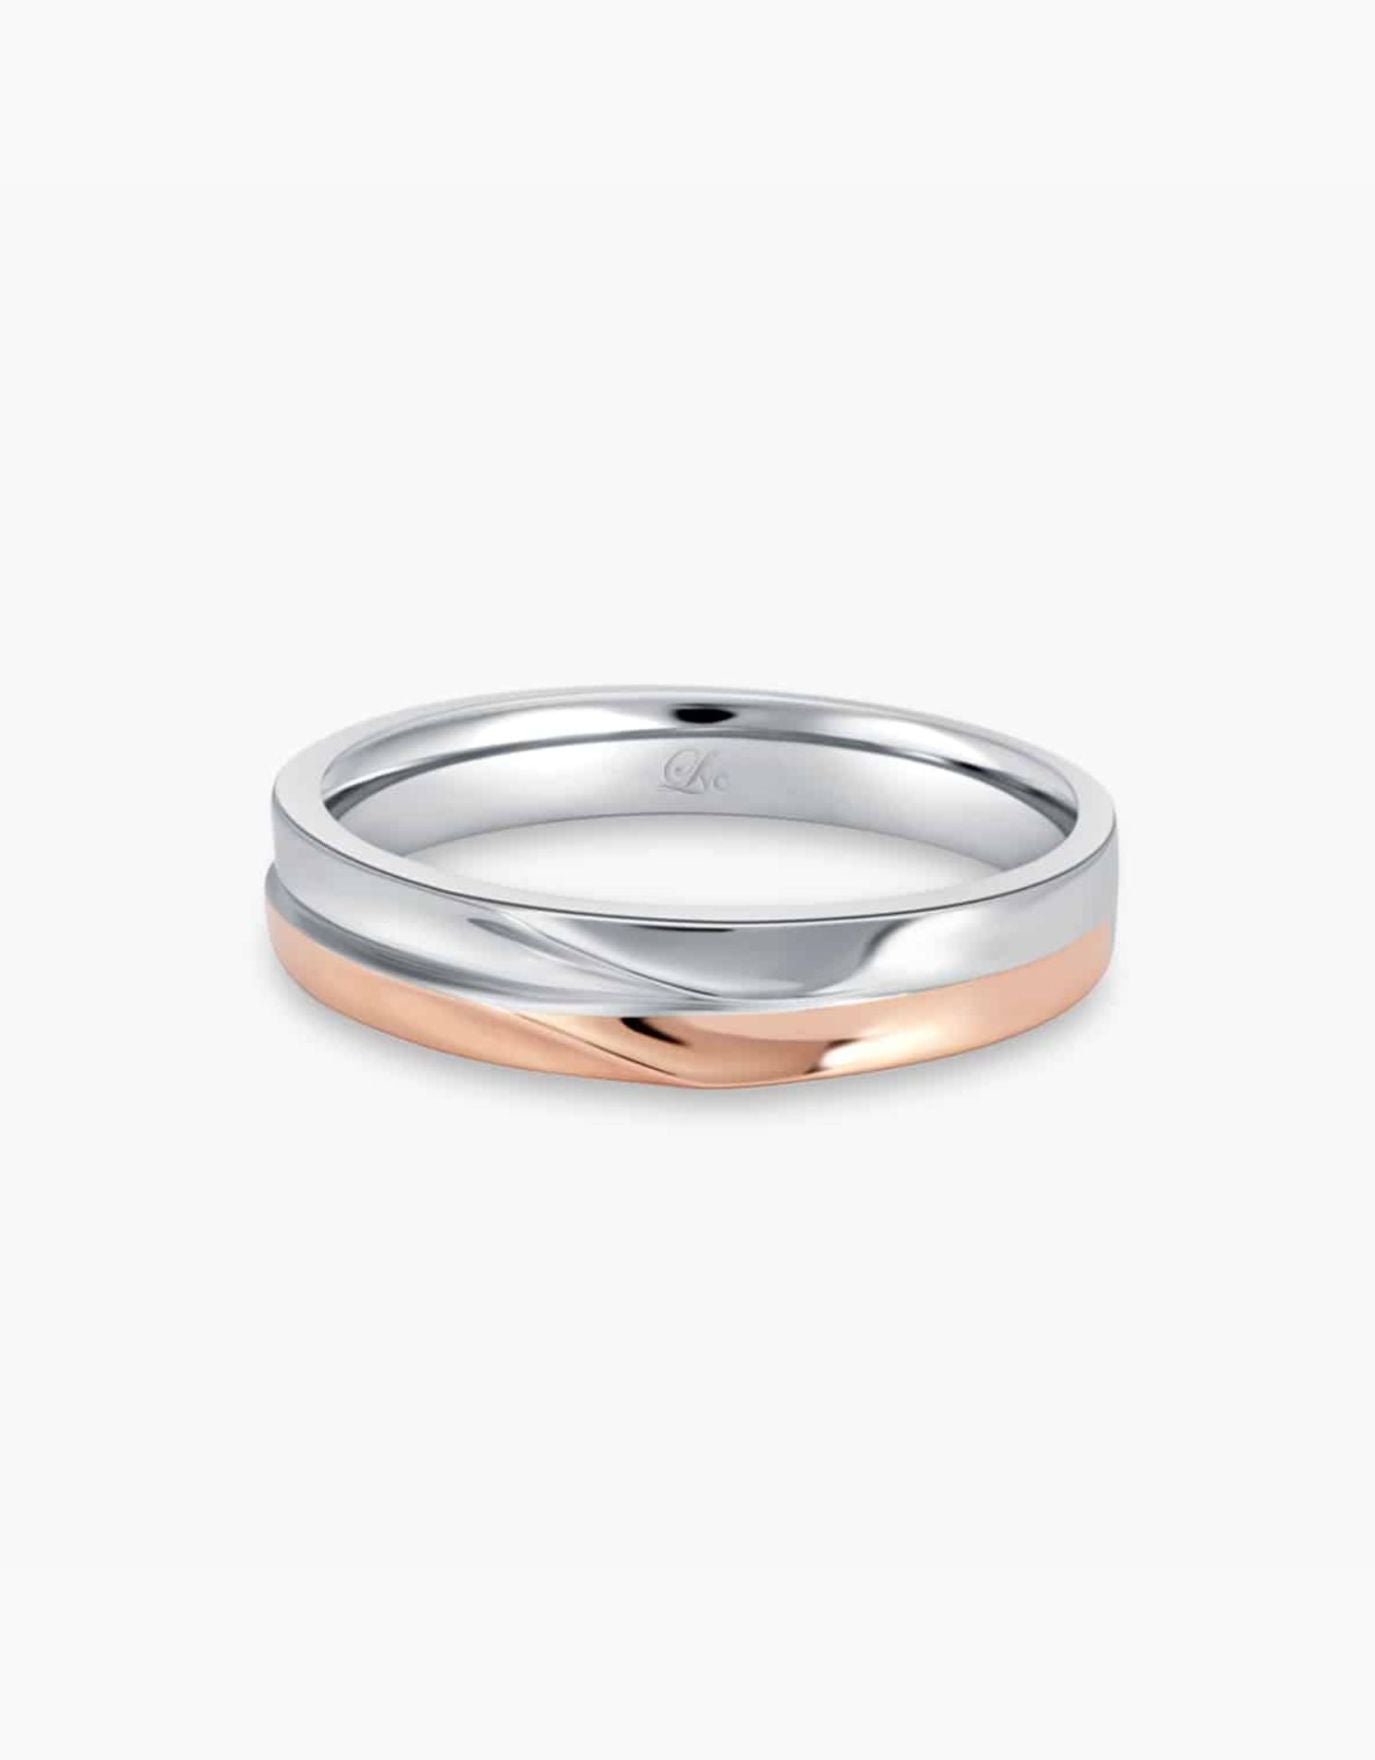 LVC Desirio Wedding Band in Dual White and Rose Gold Glossy Finish